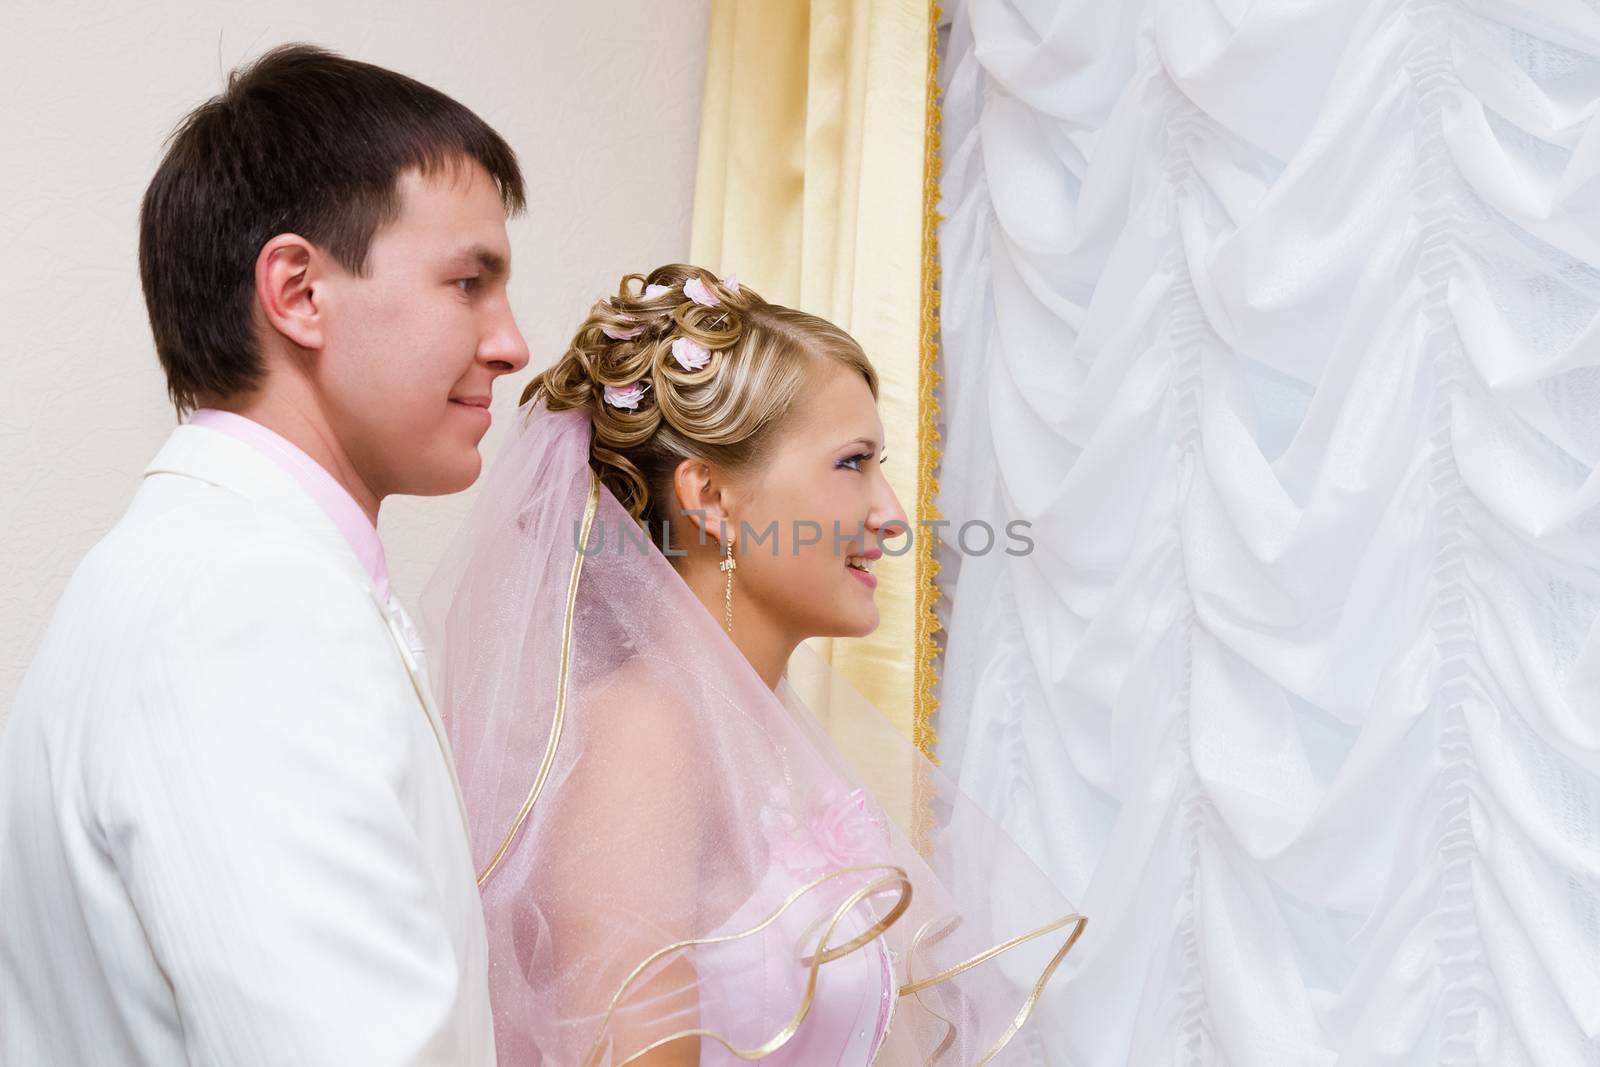 wedding. The bride and groom look out the window by pzRomashka